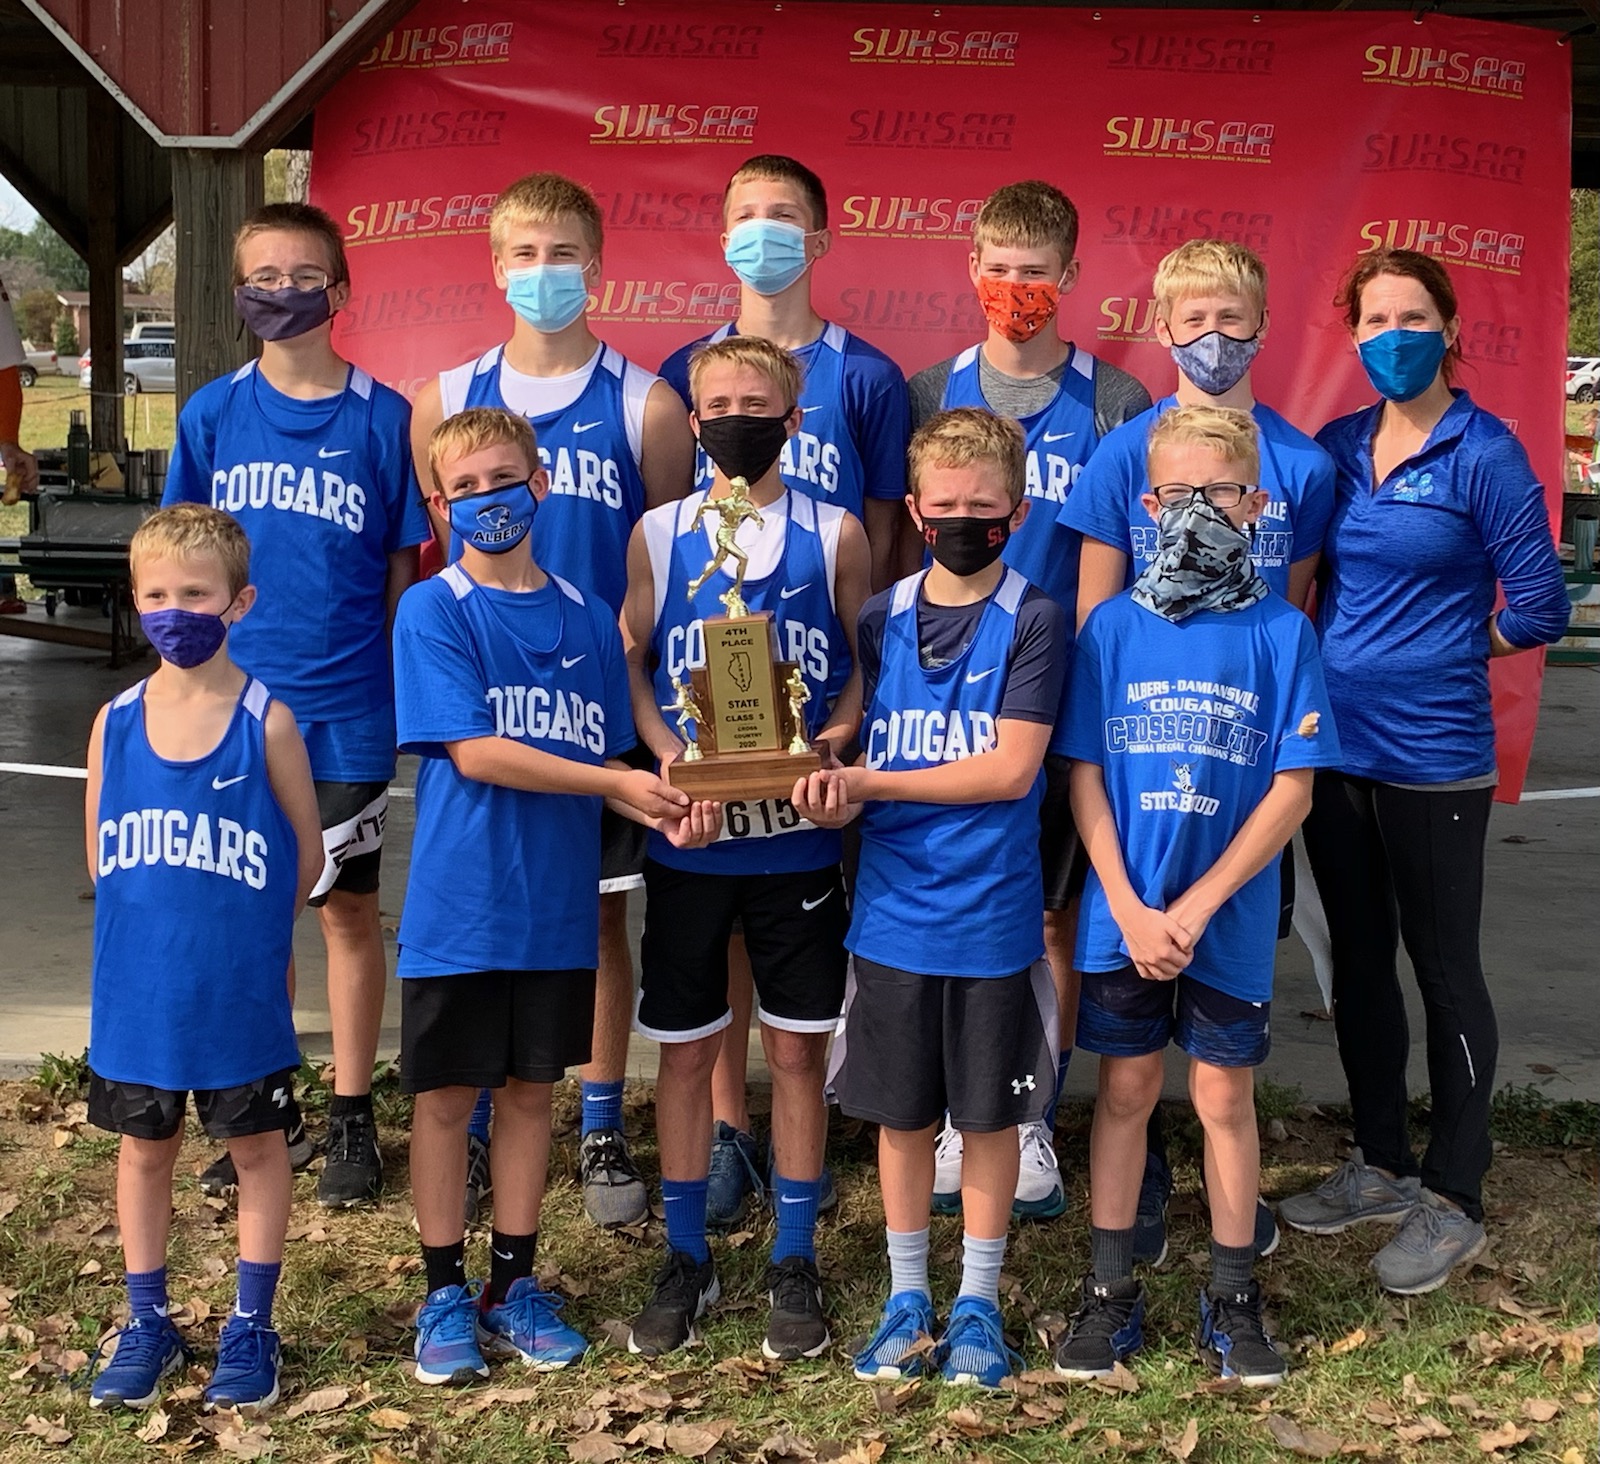 2020 Class S Boys 4th Place Albers Damiansville